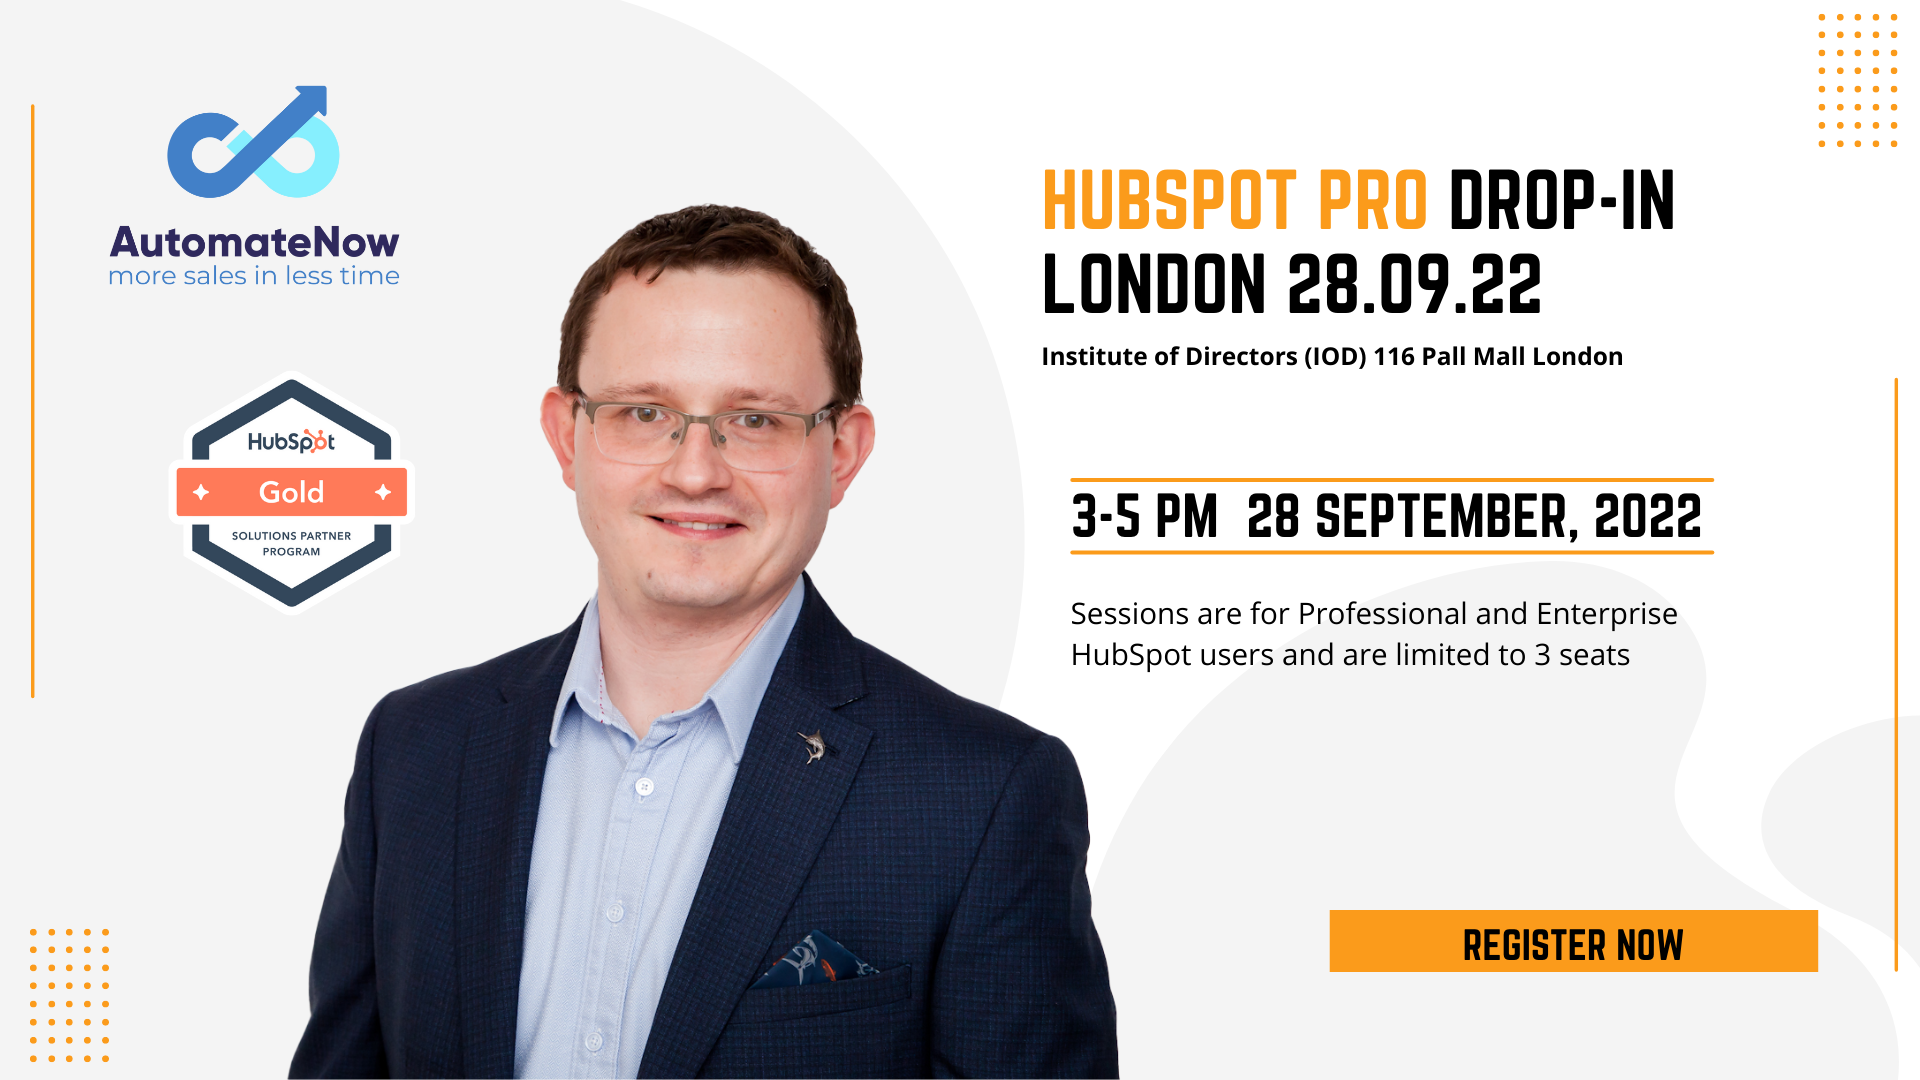 HubSpot Pro Drop-in Session London 28.09.22